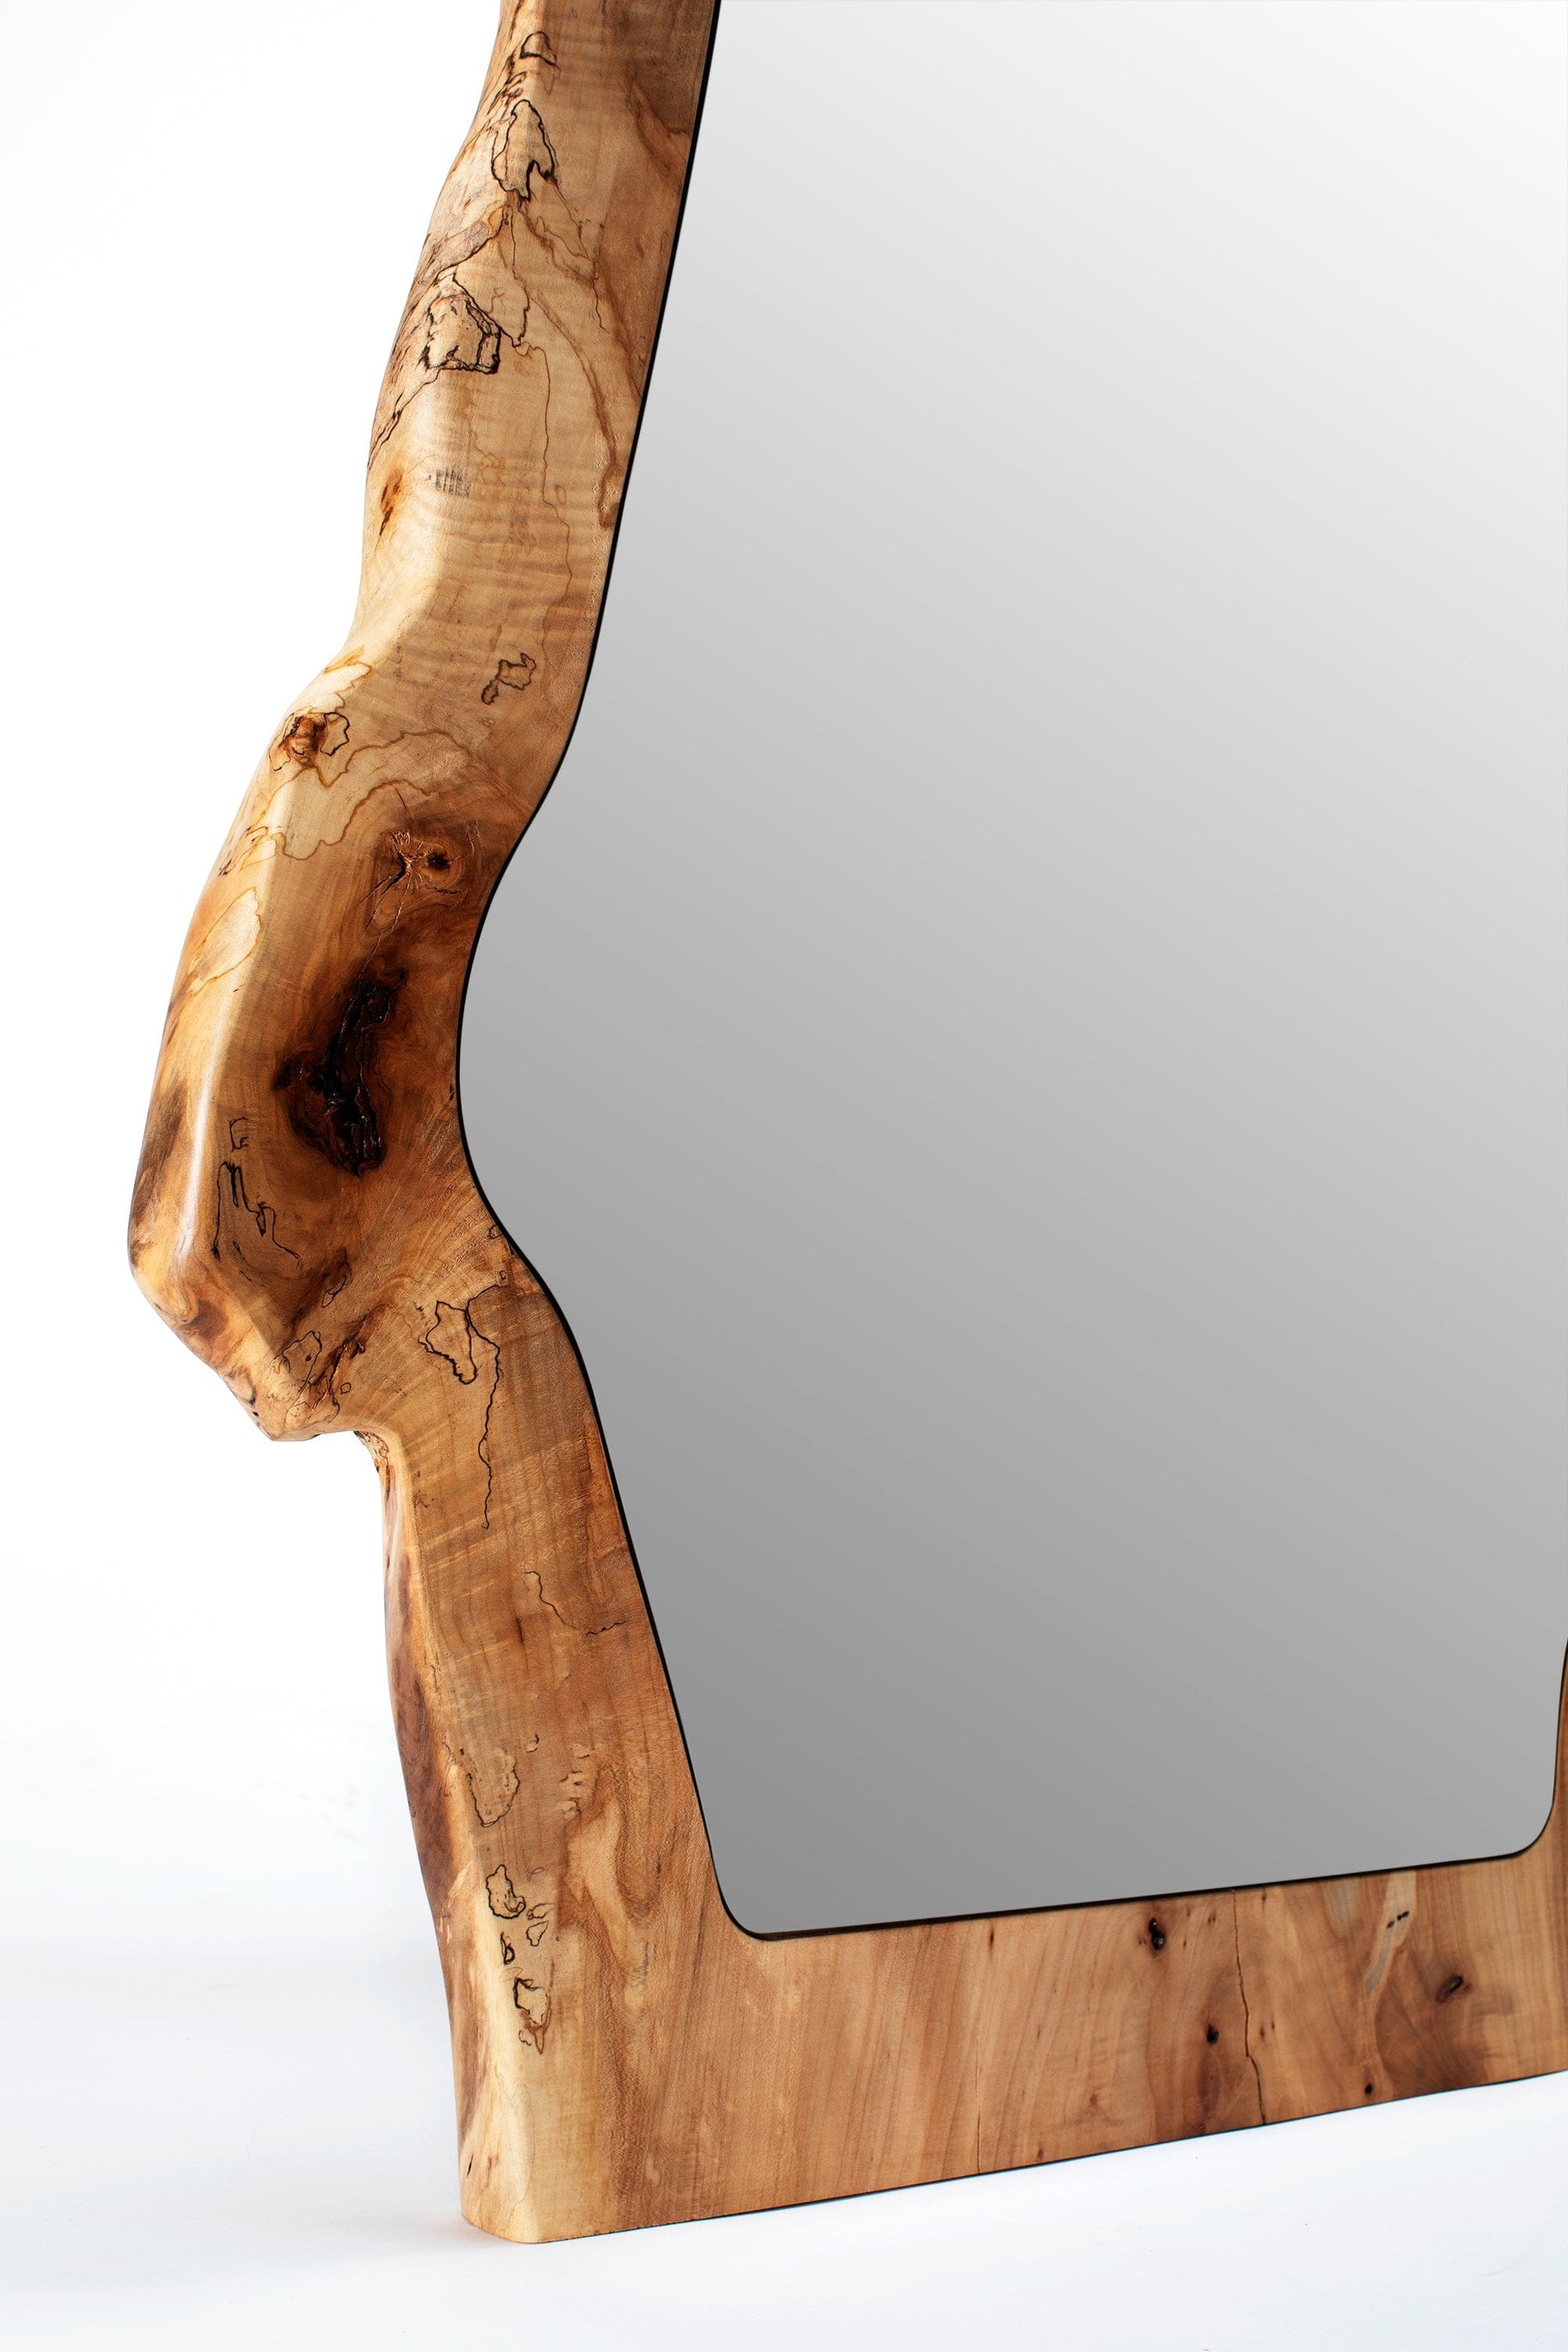 The Carpentry Shop Co. Nature Inspired Leaning Mirror